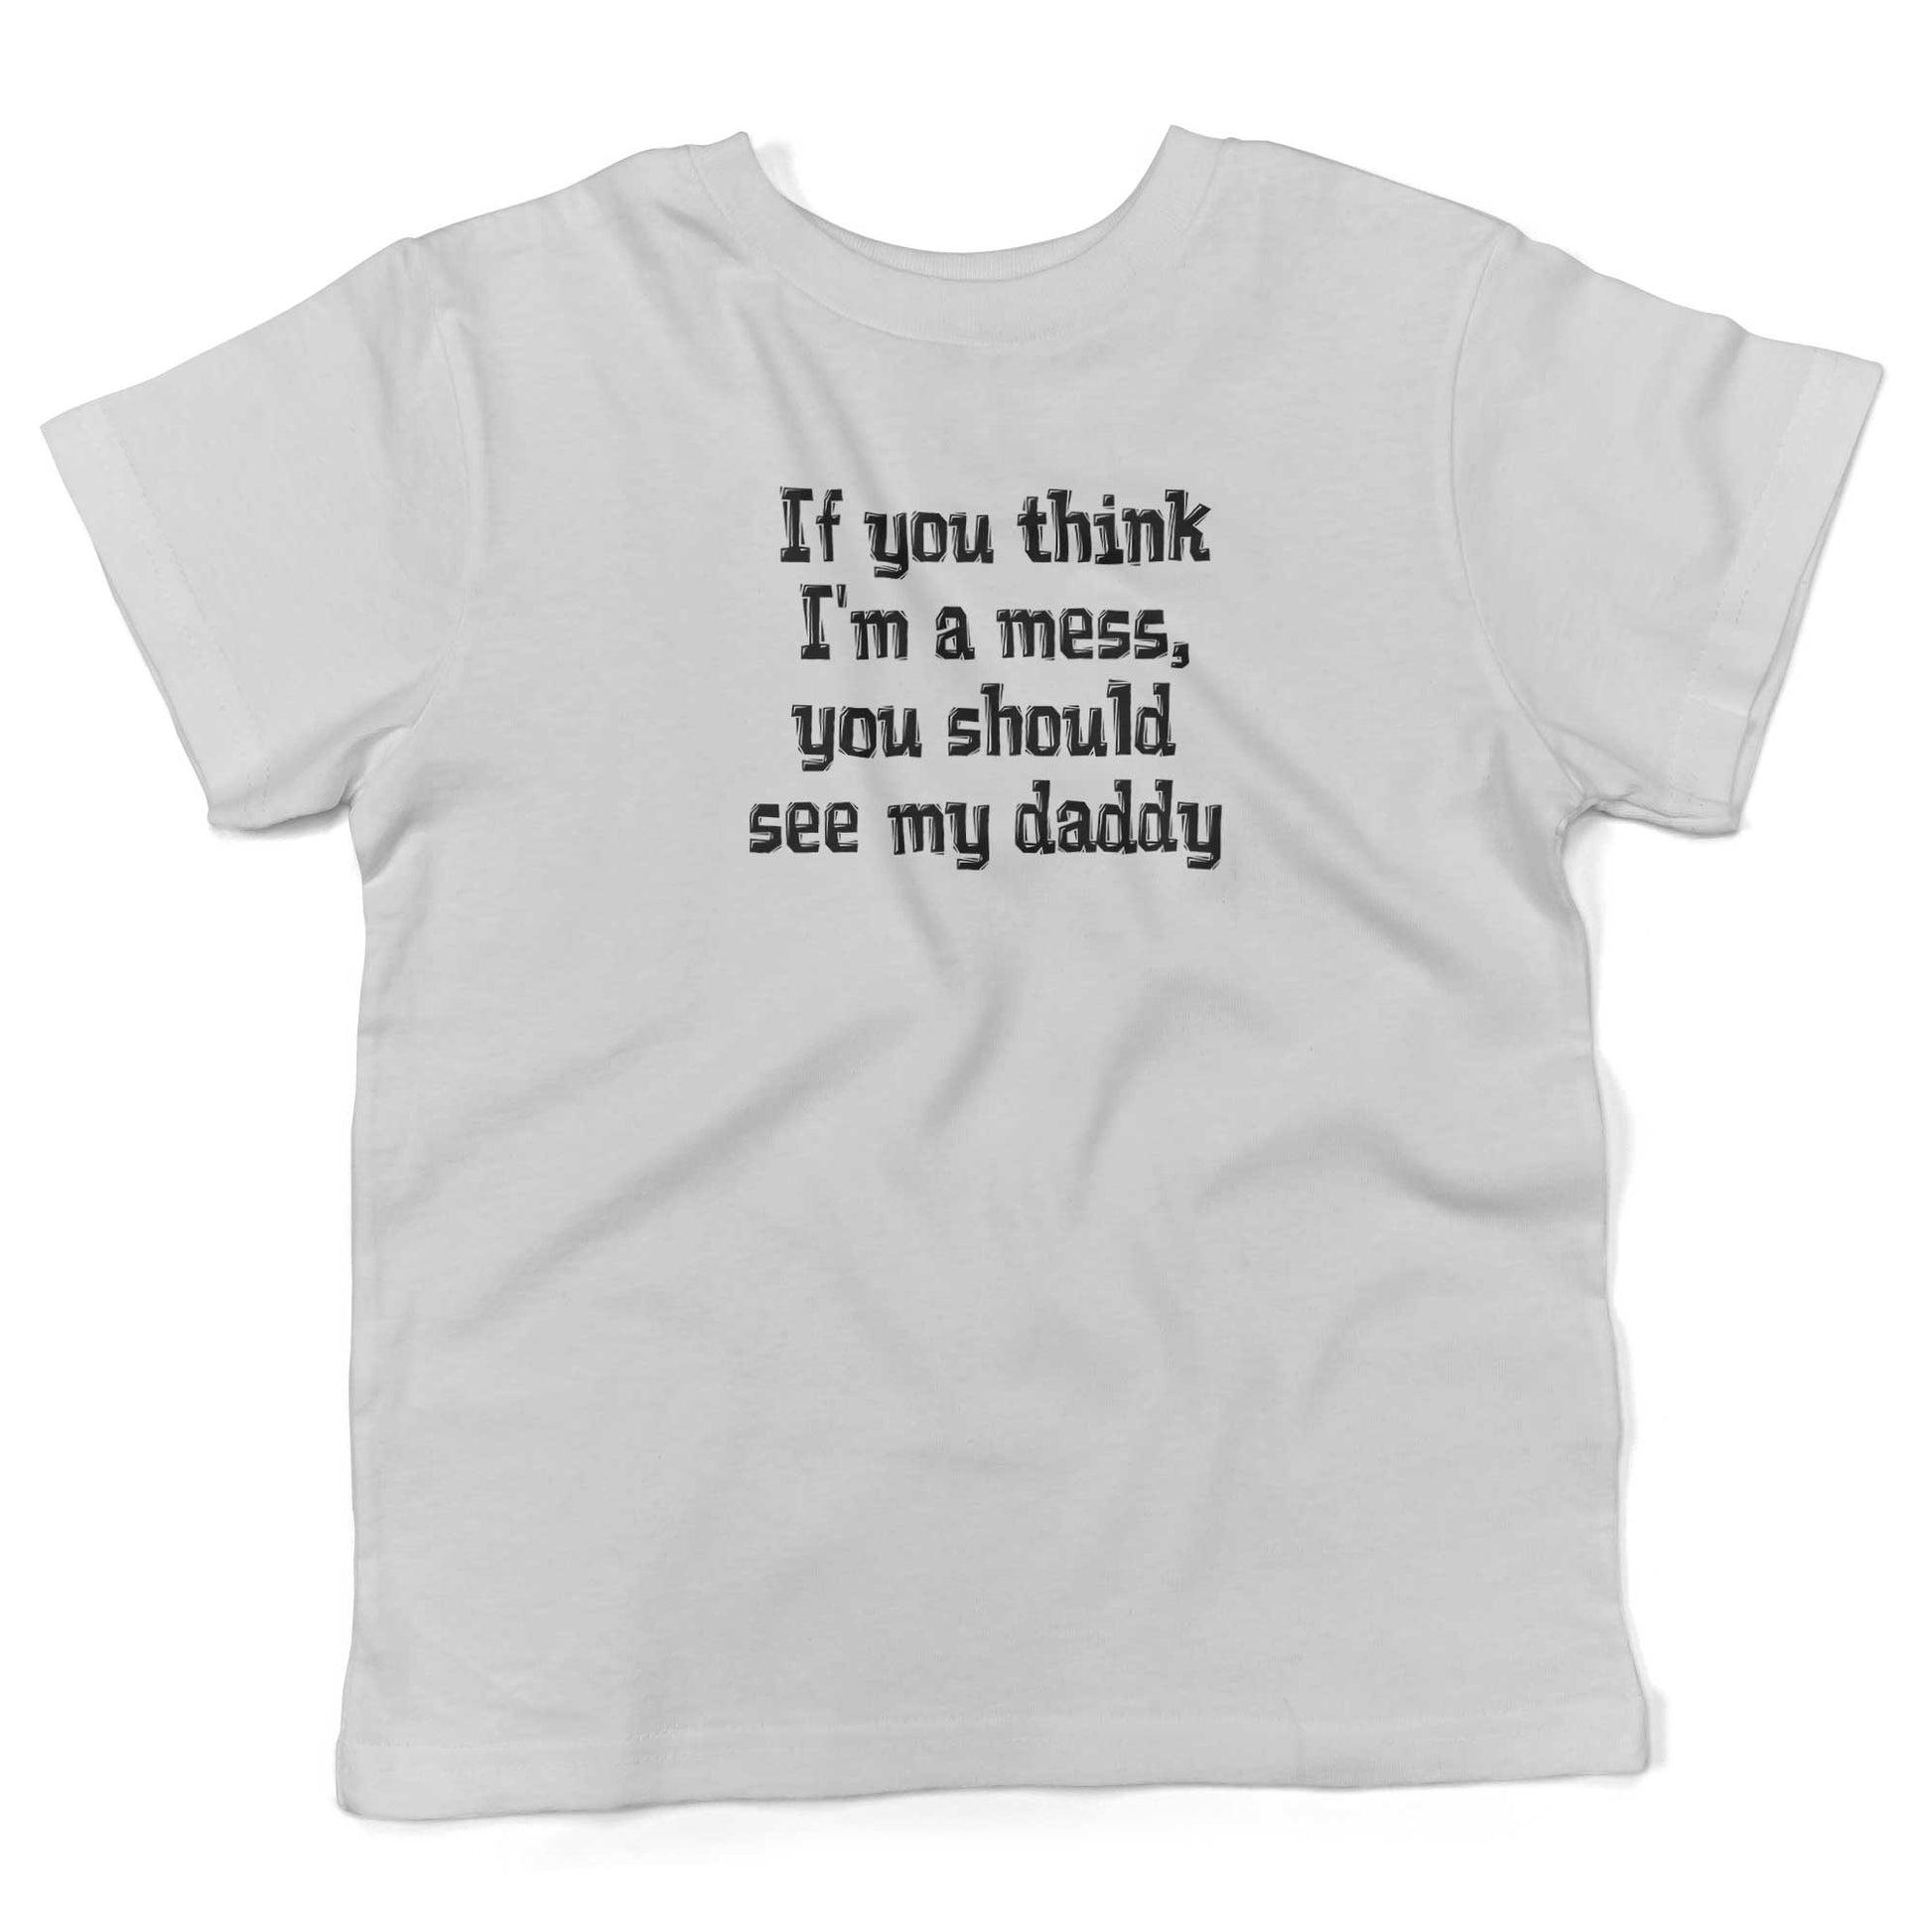 If You Think I'm A Mess, You Should See My Daddy Toddler Shirt-White-2T